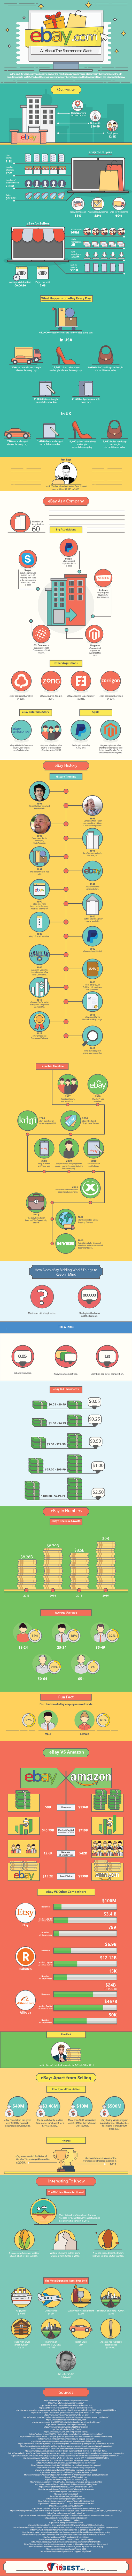 Infographic - All You Need to Know About eBay